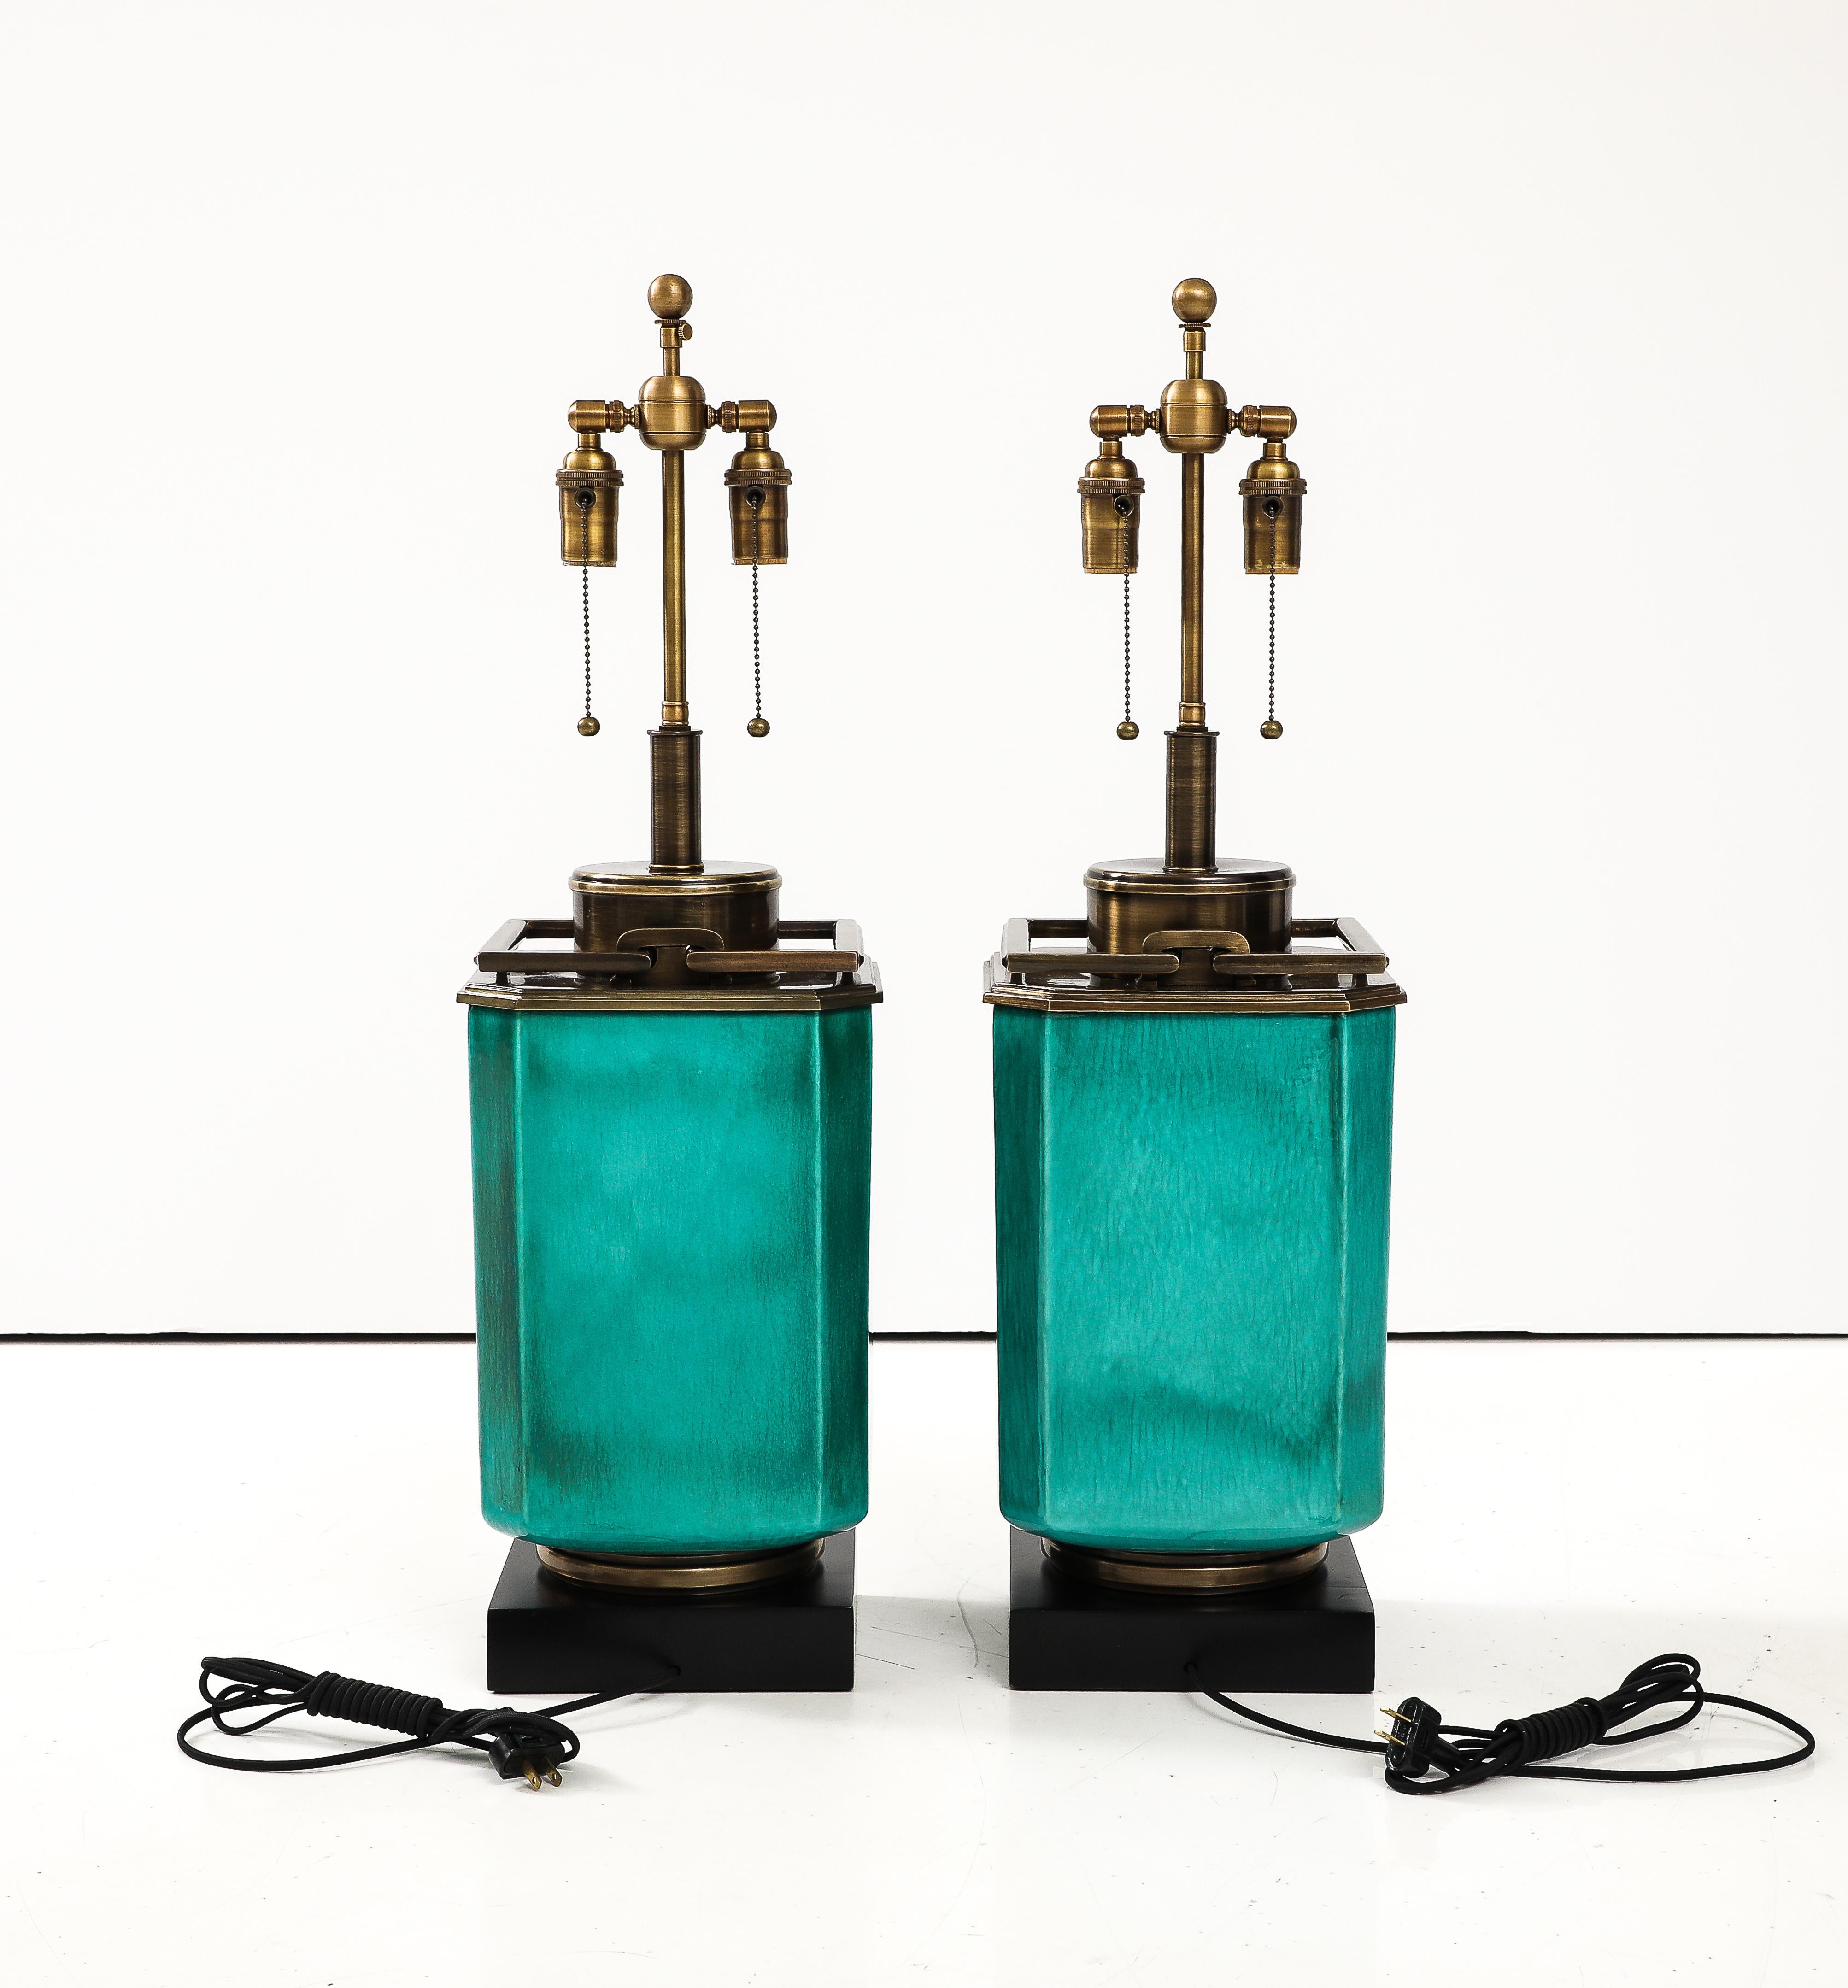 Pair of 1960's Large Ceramic Lamps With a Jade Crackle Glaze Finish by Stiffel. For Sale 4